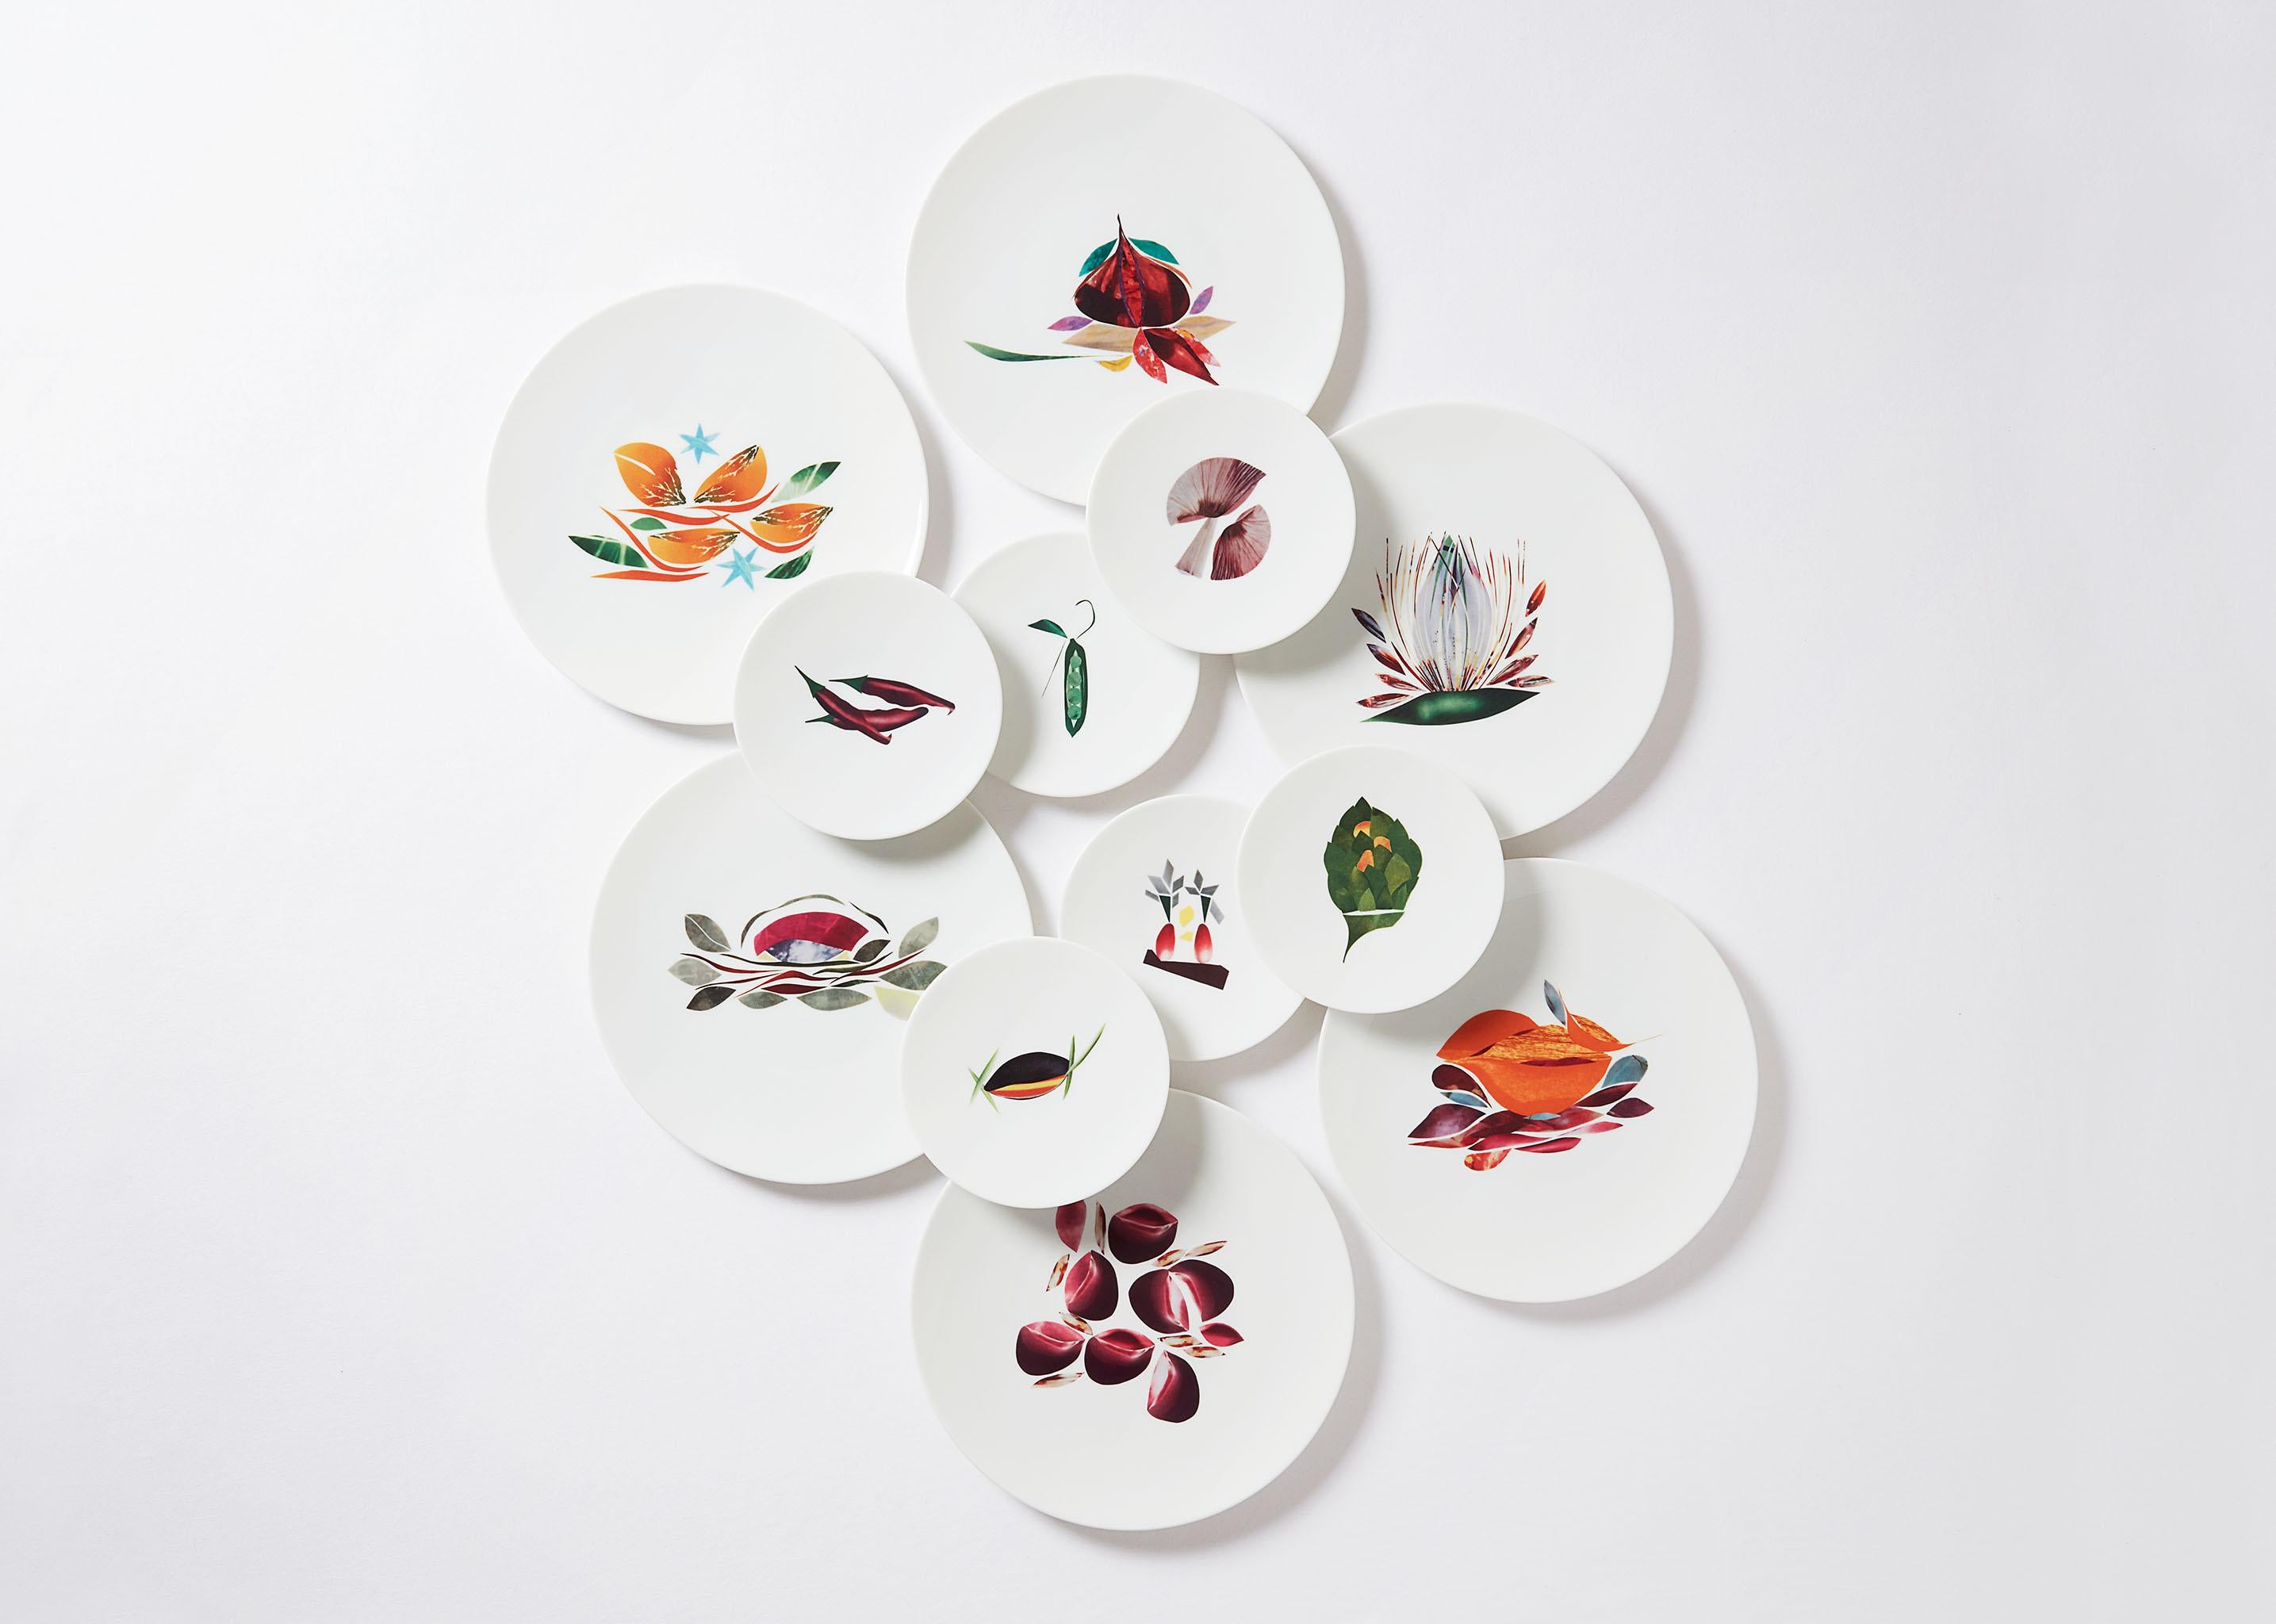 Contemporary Bread Porcelain Plate By The Chef Alain Passard Model 